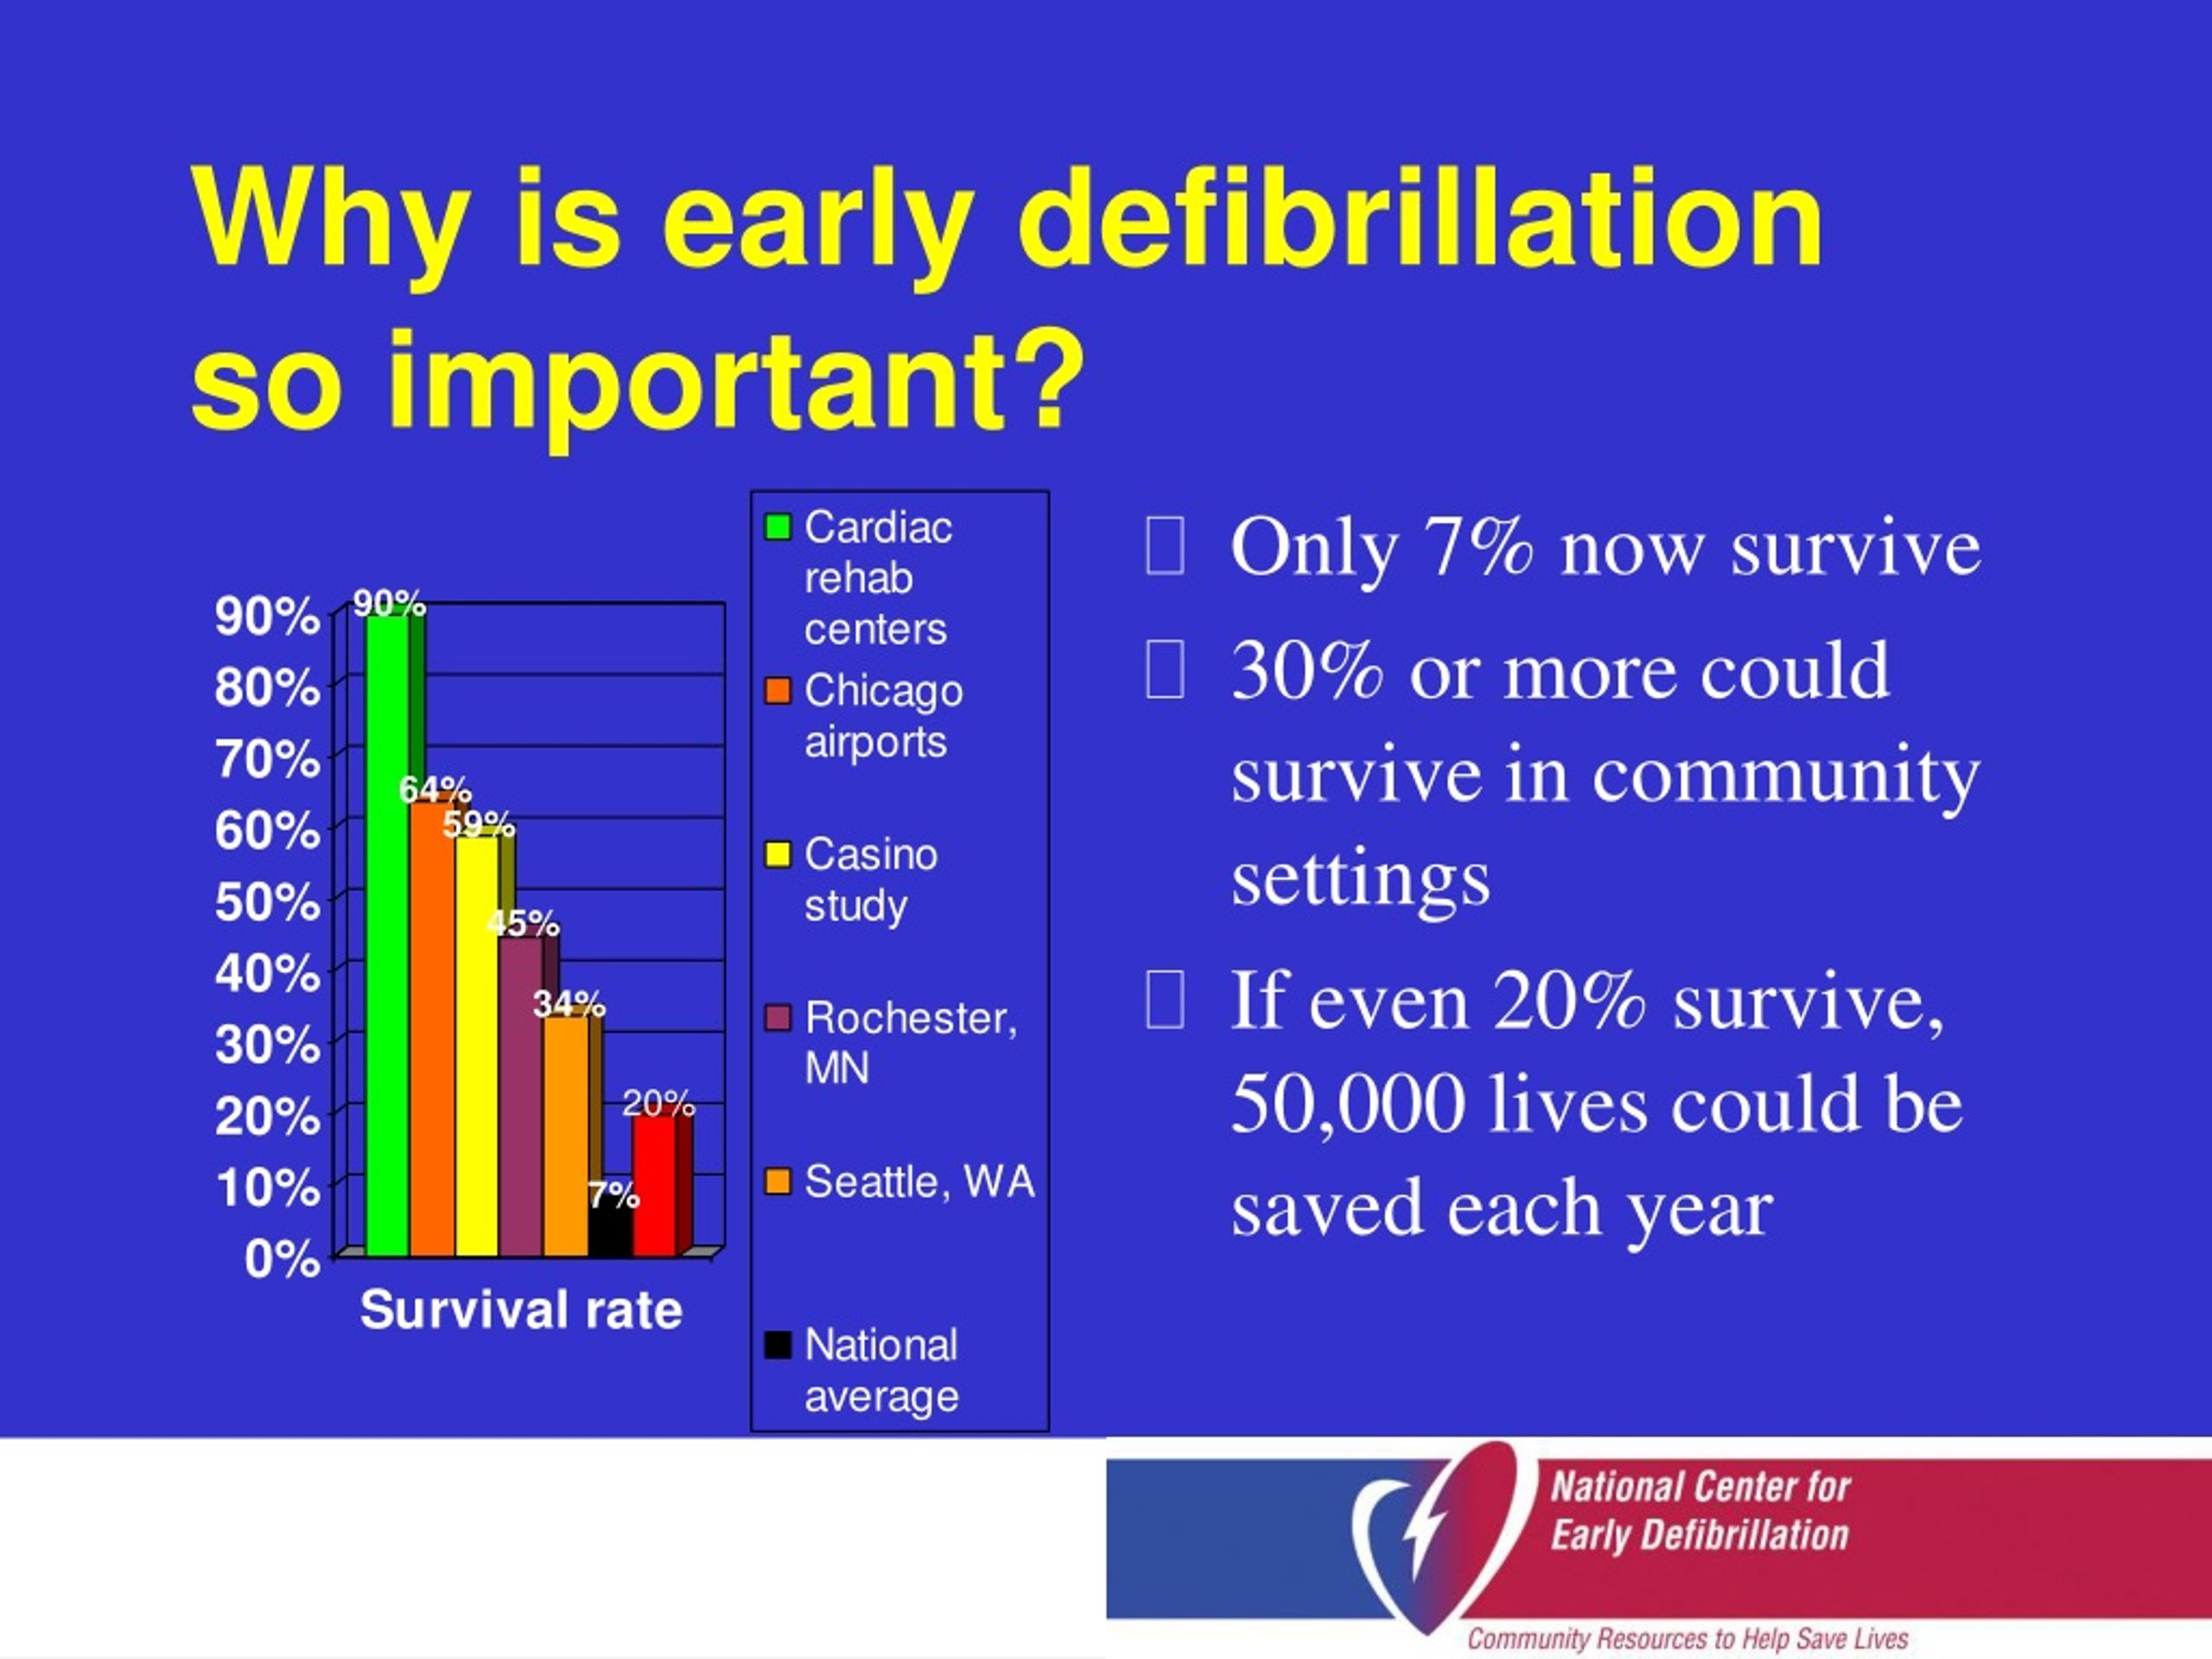 Ppt The Case For Early Defibrillation Powerpoint Presentation Free Download Id9172429 